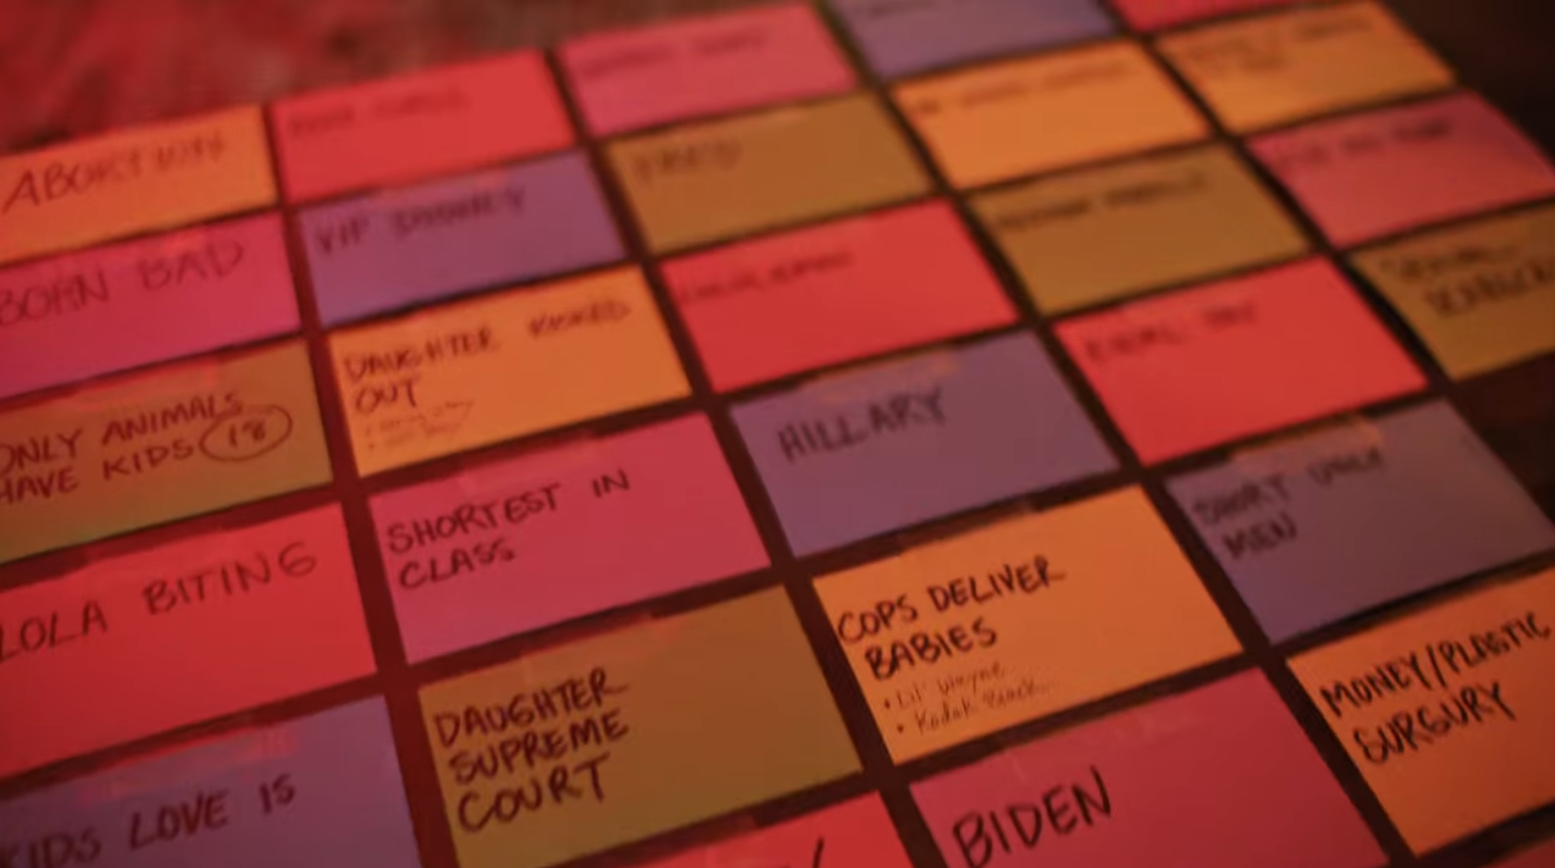 A grid of slips of colored paper with various notes written in black sharpie. Some of the headlines read: Shortest in Class, Daughter Supreme Court, Hillary, Cops Deliver Babies.